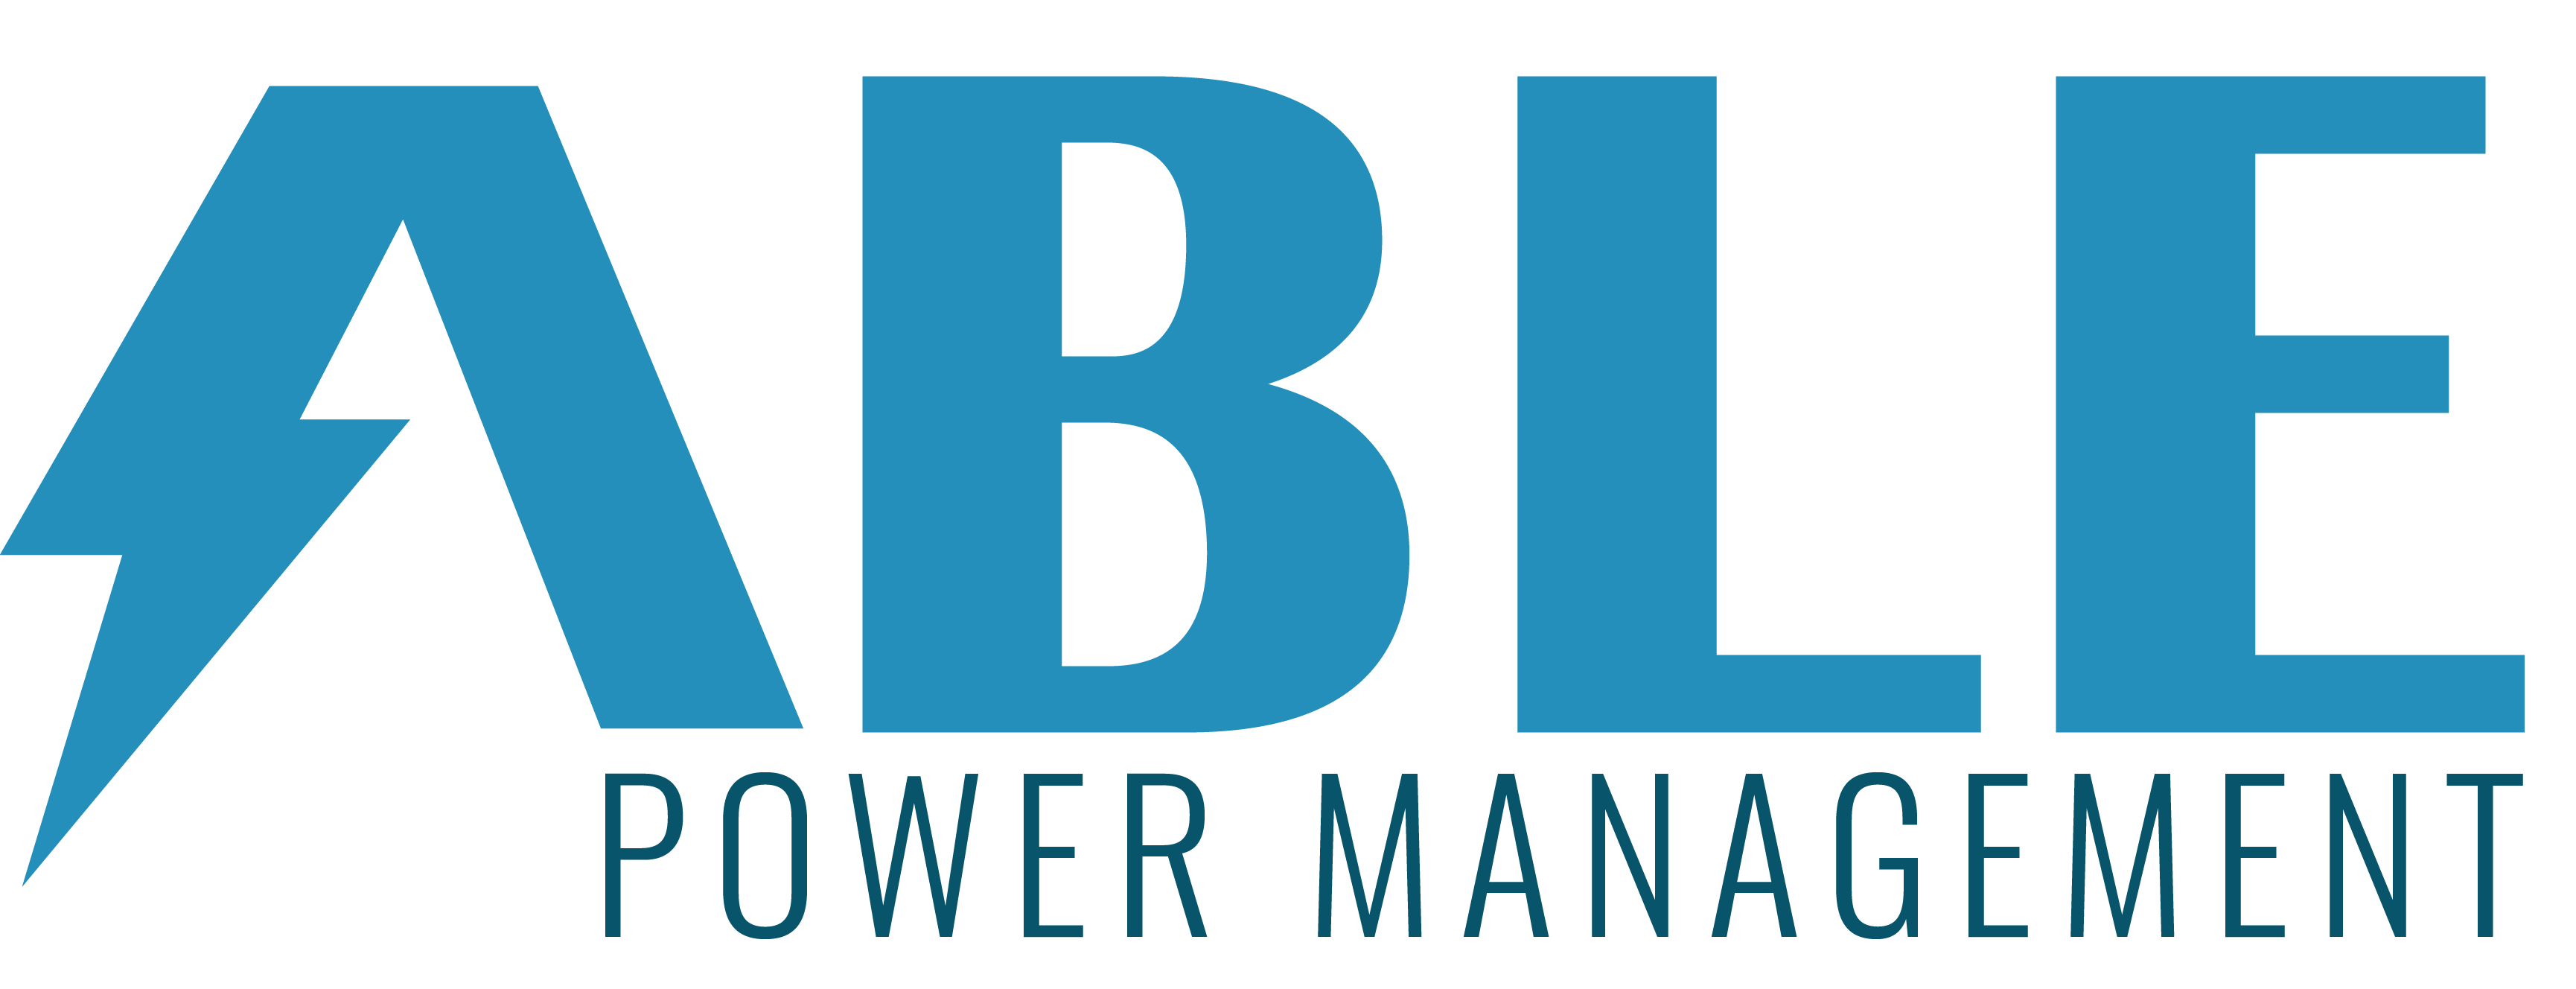 Able Power Management